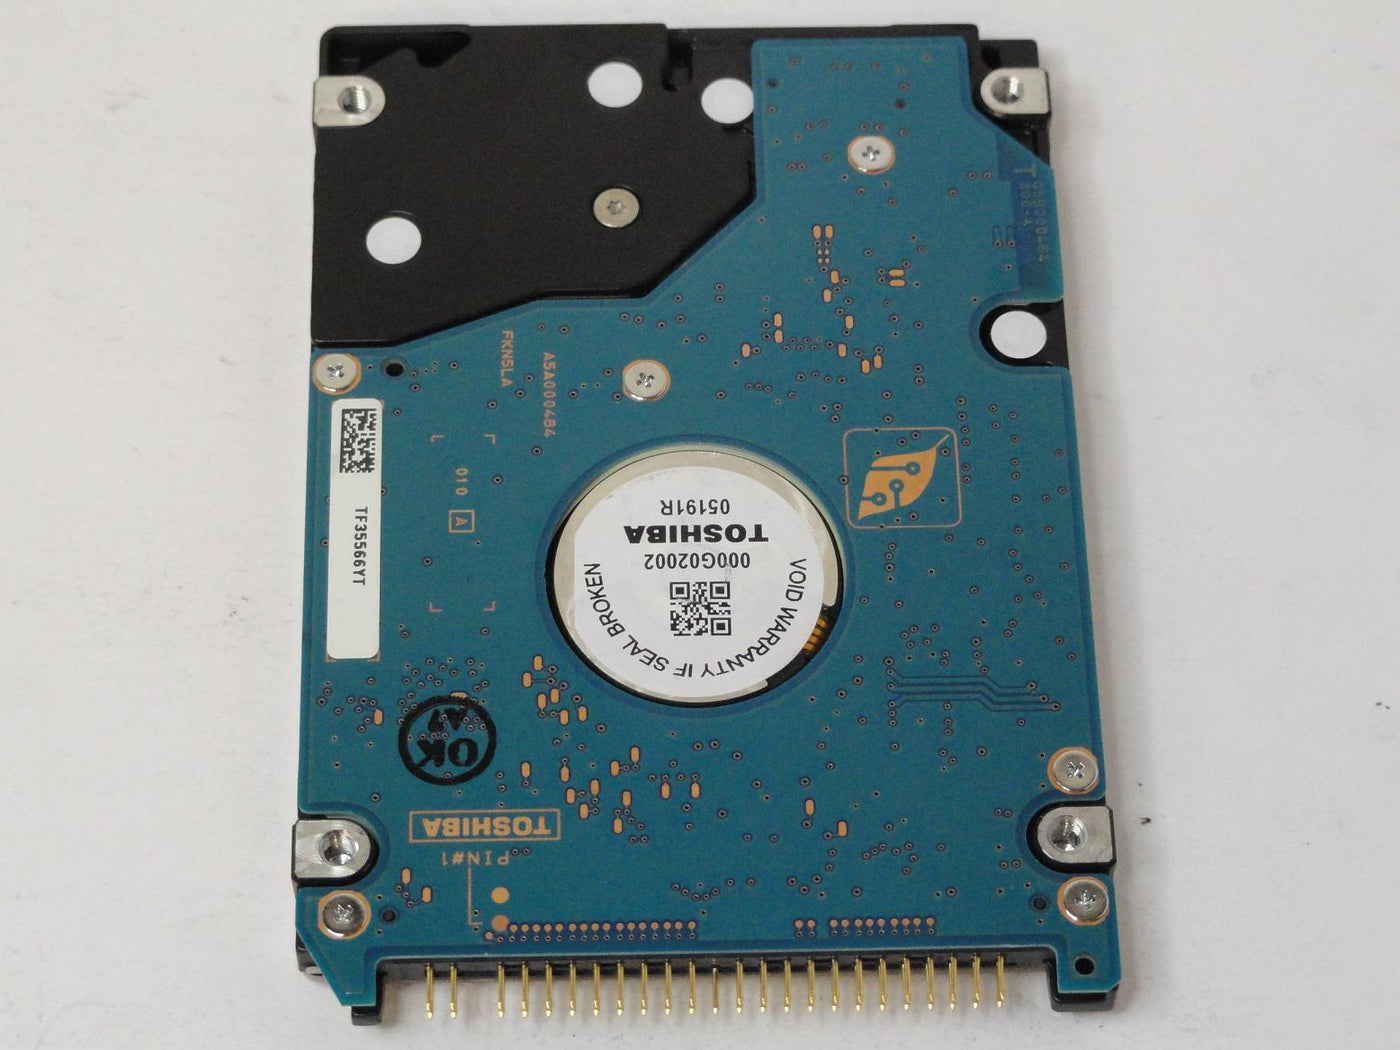 PR14904_HDD2187_Toshiba HP 20GB IDE 4200rpm 2.5in HDD - Image3